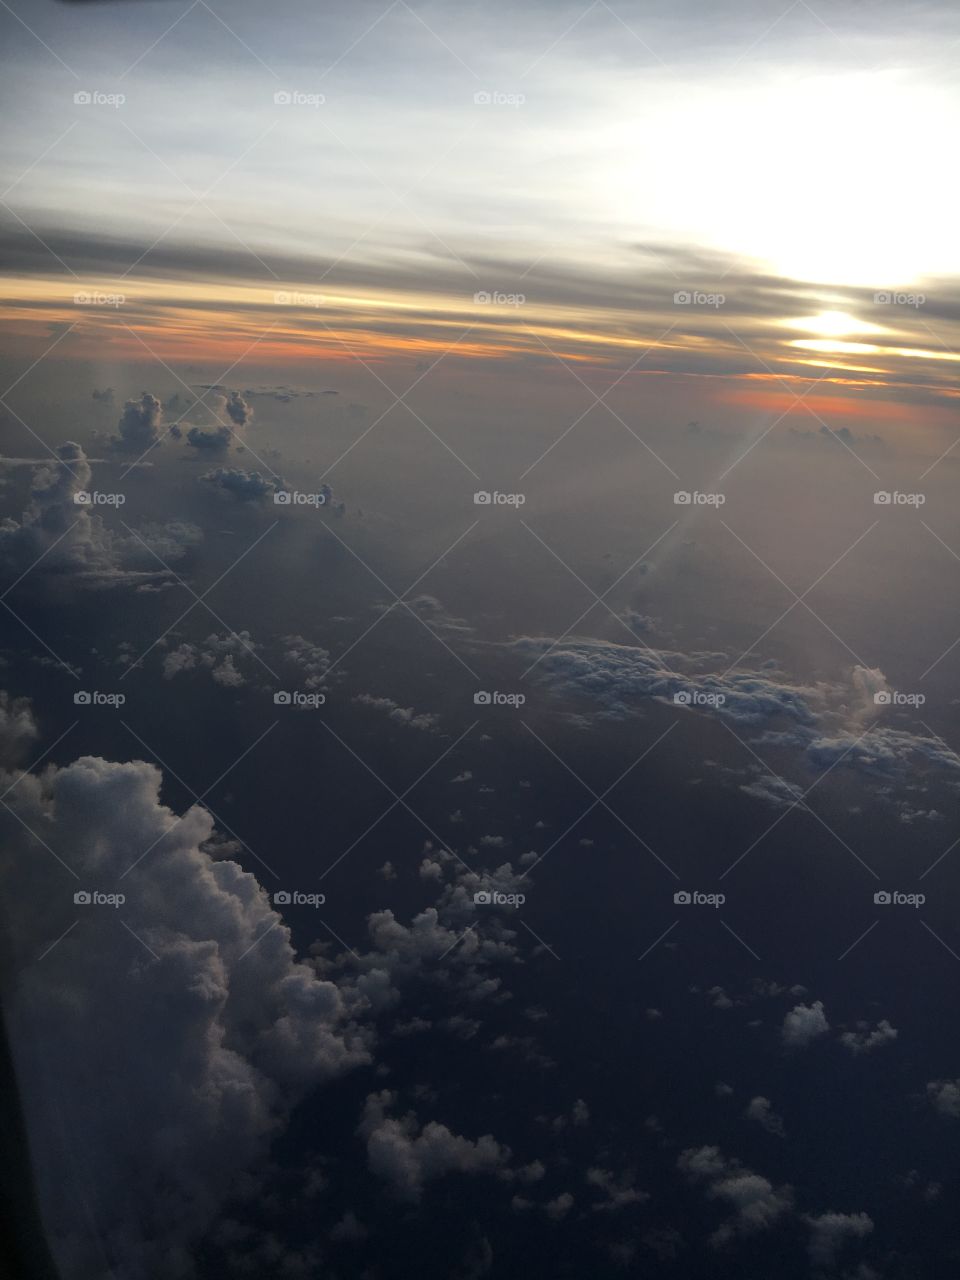 Cloud formations from an aeroplane 